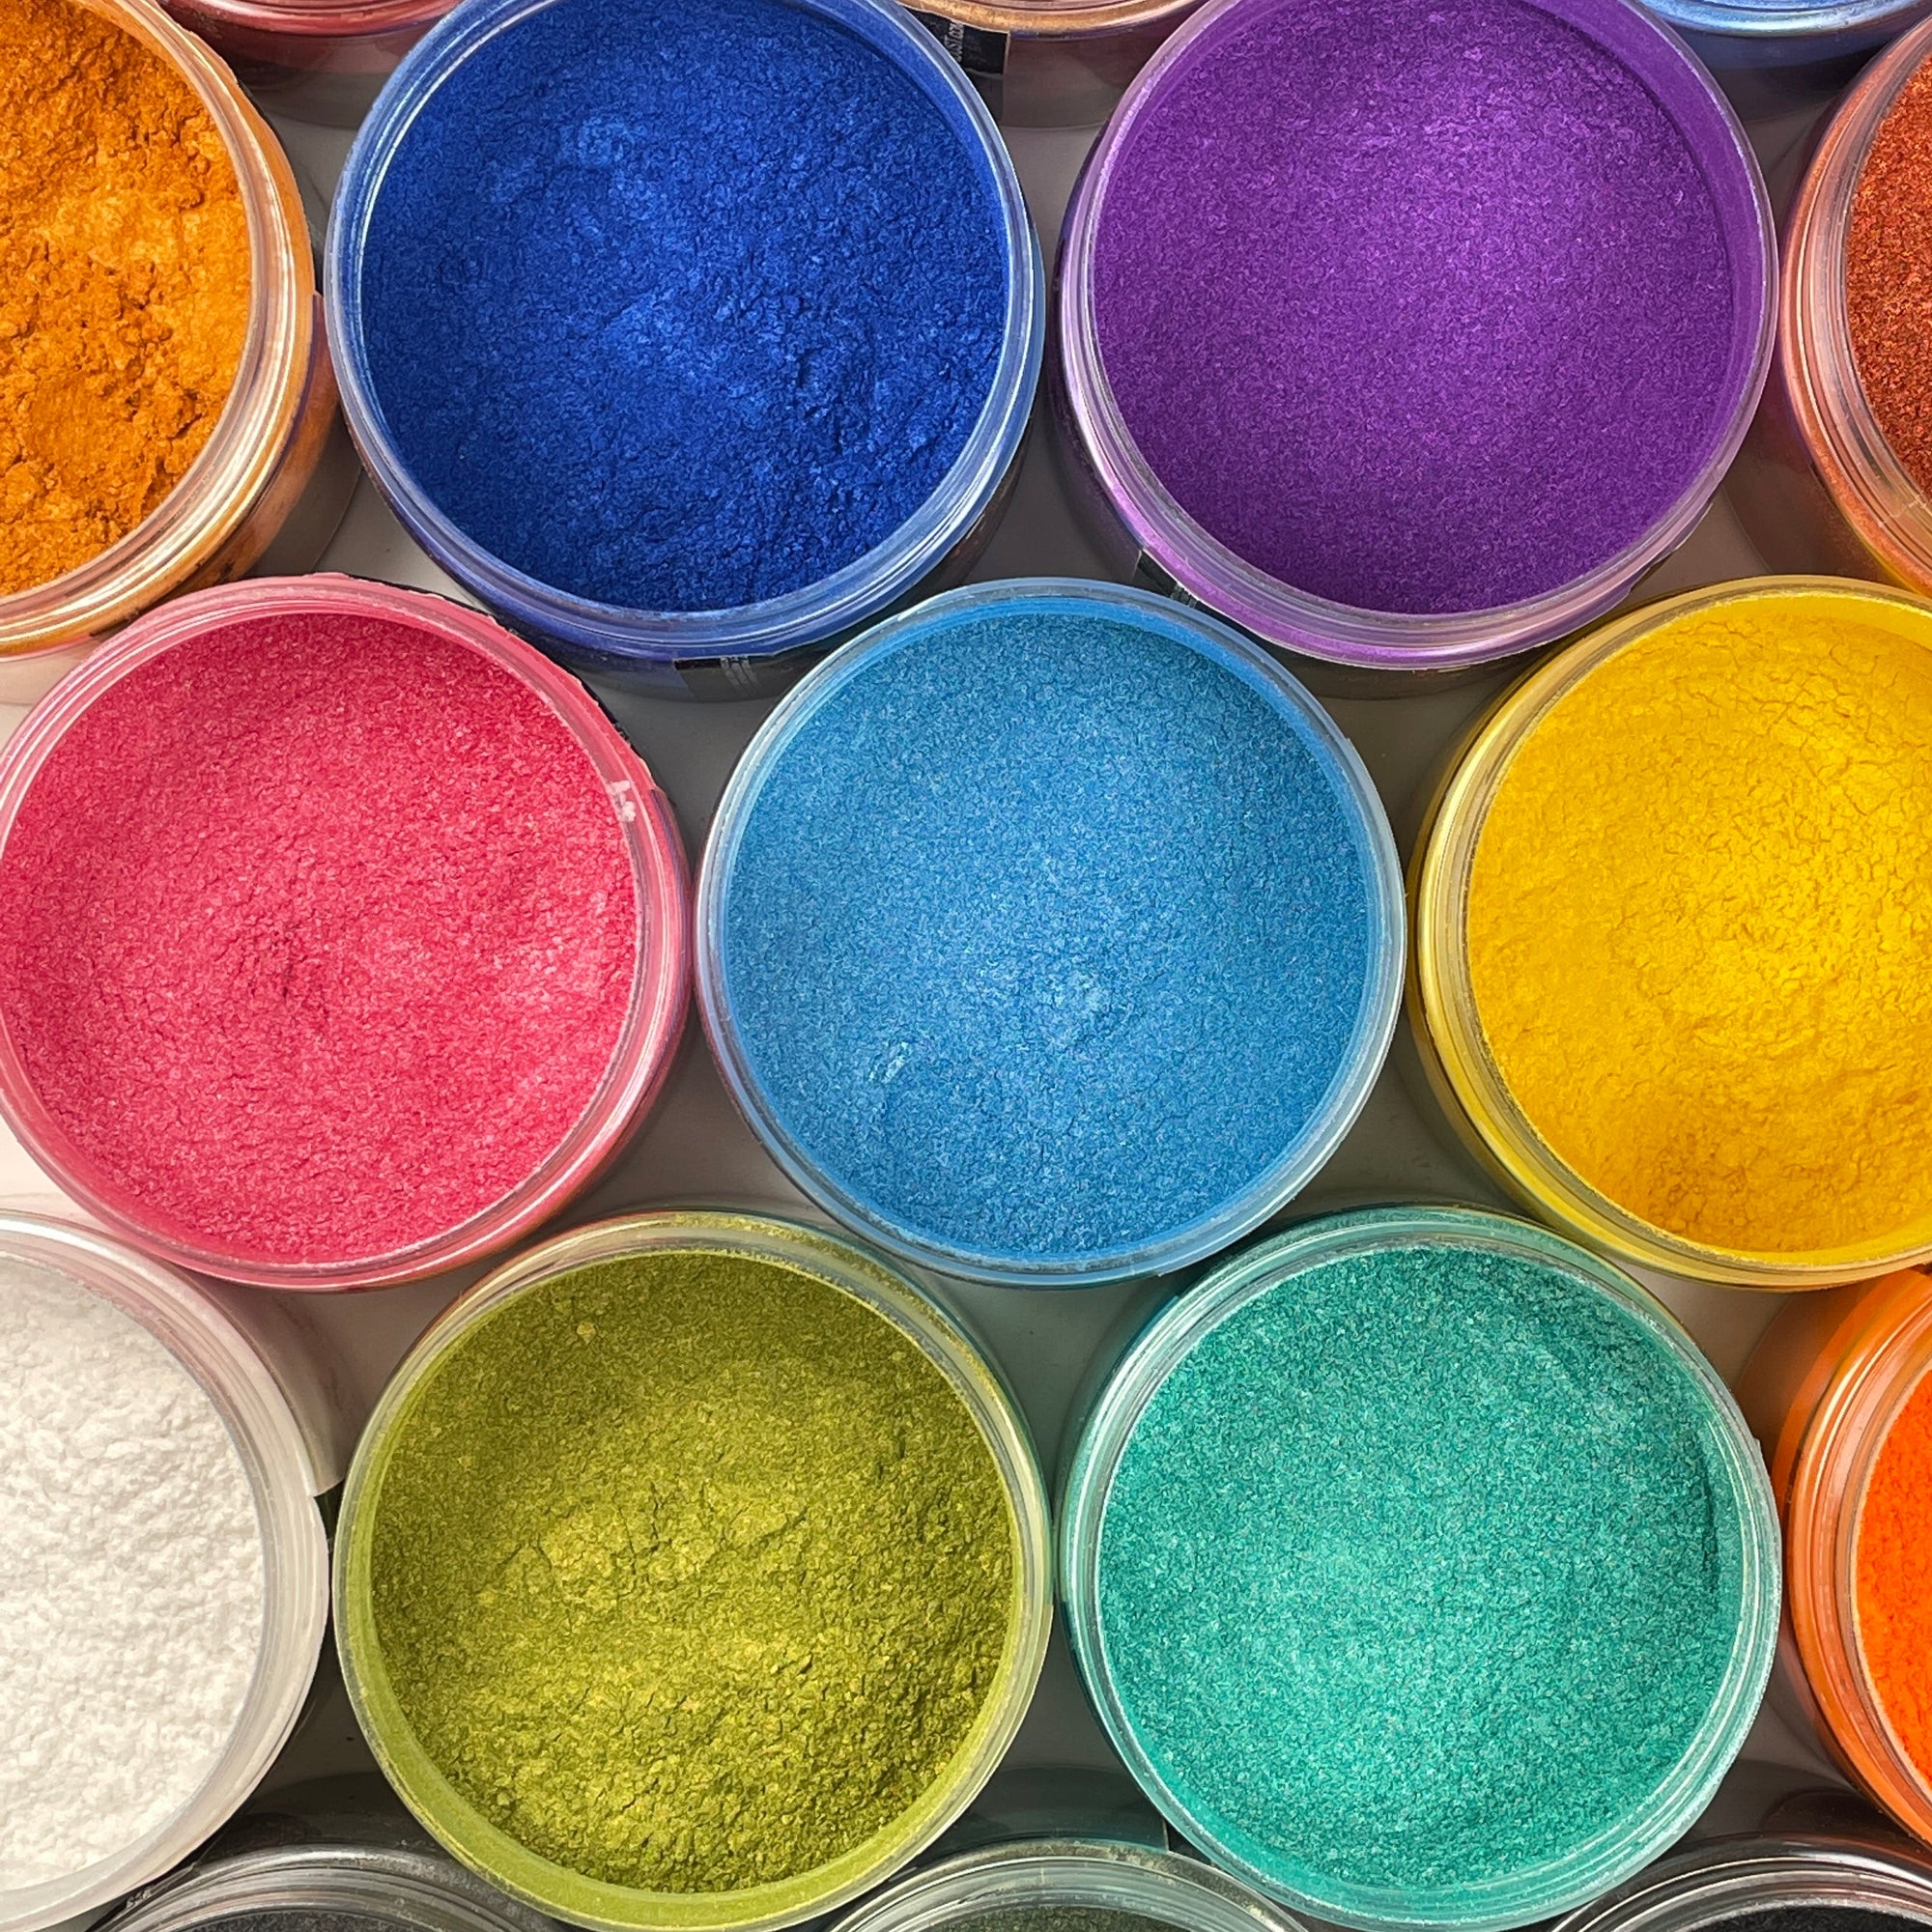 All you Need to know about Pigments